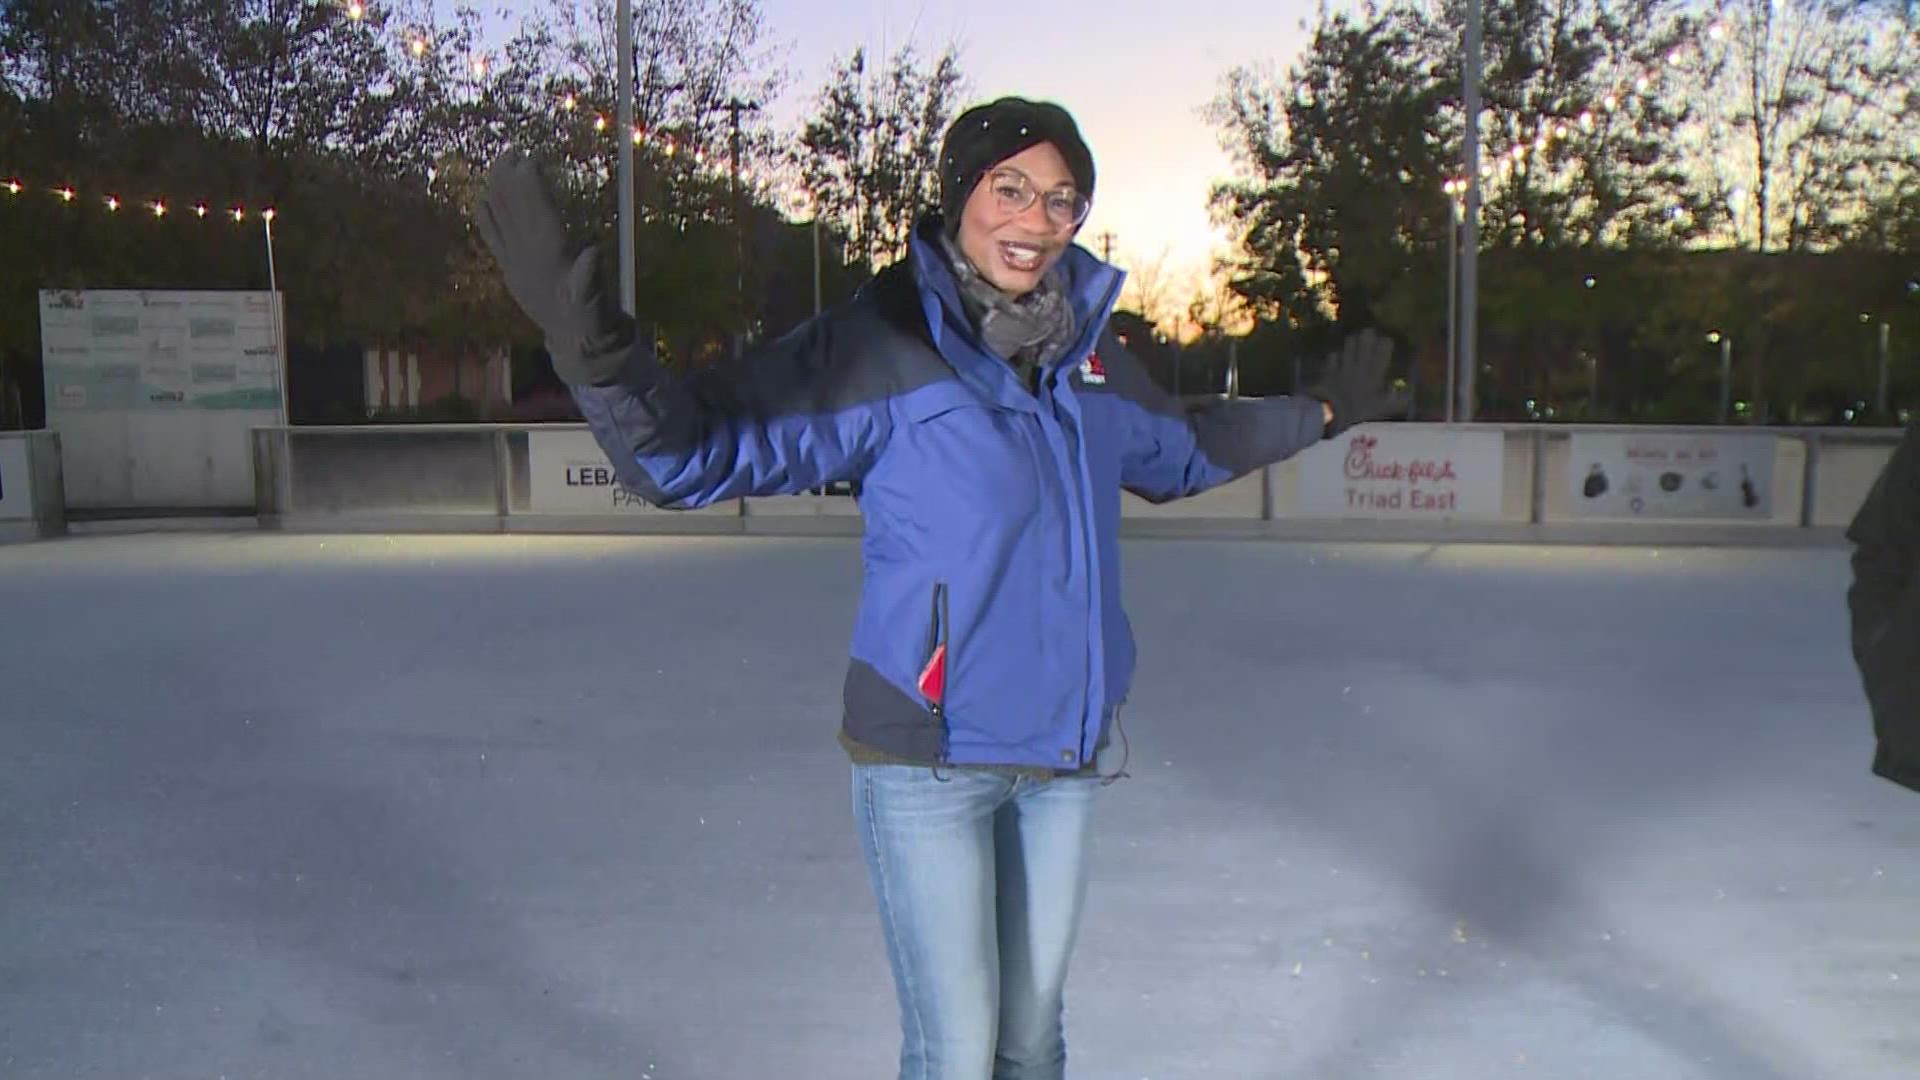 The outdoor ice skating season runs through the end of January at Lebauer Park.